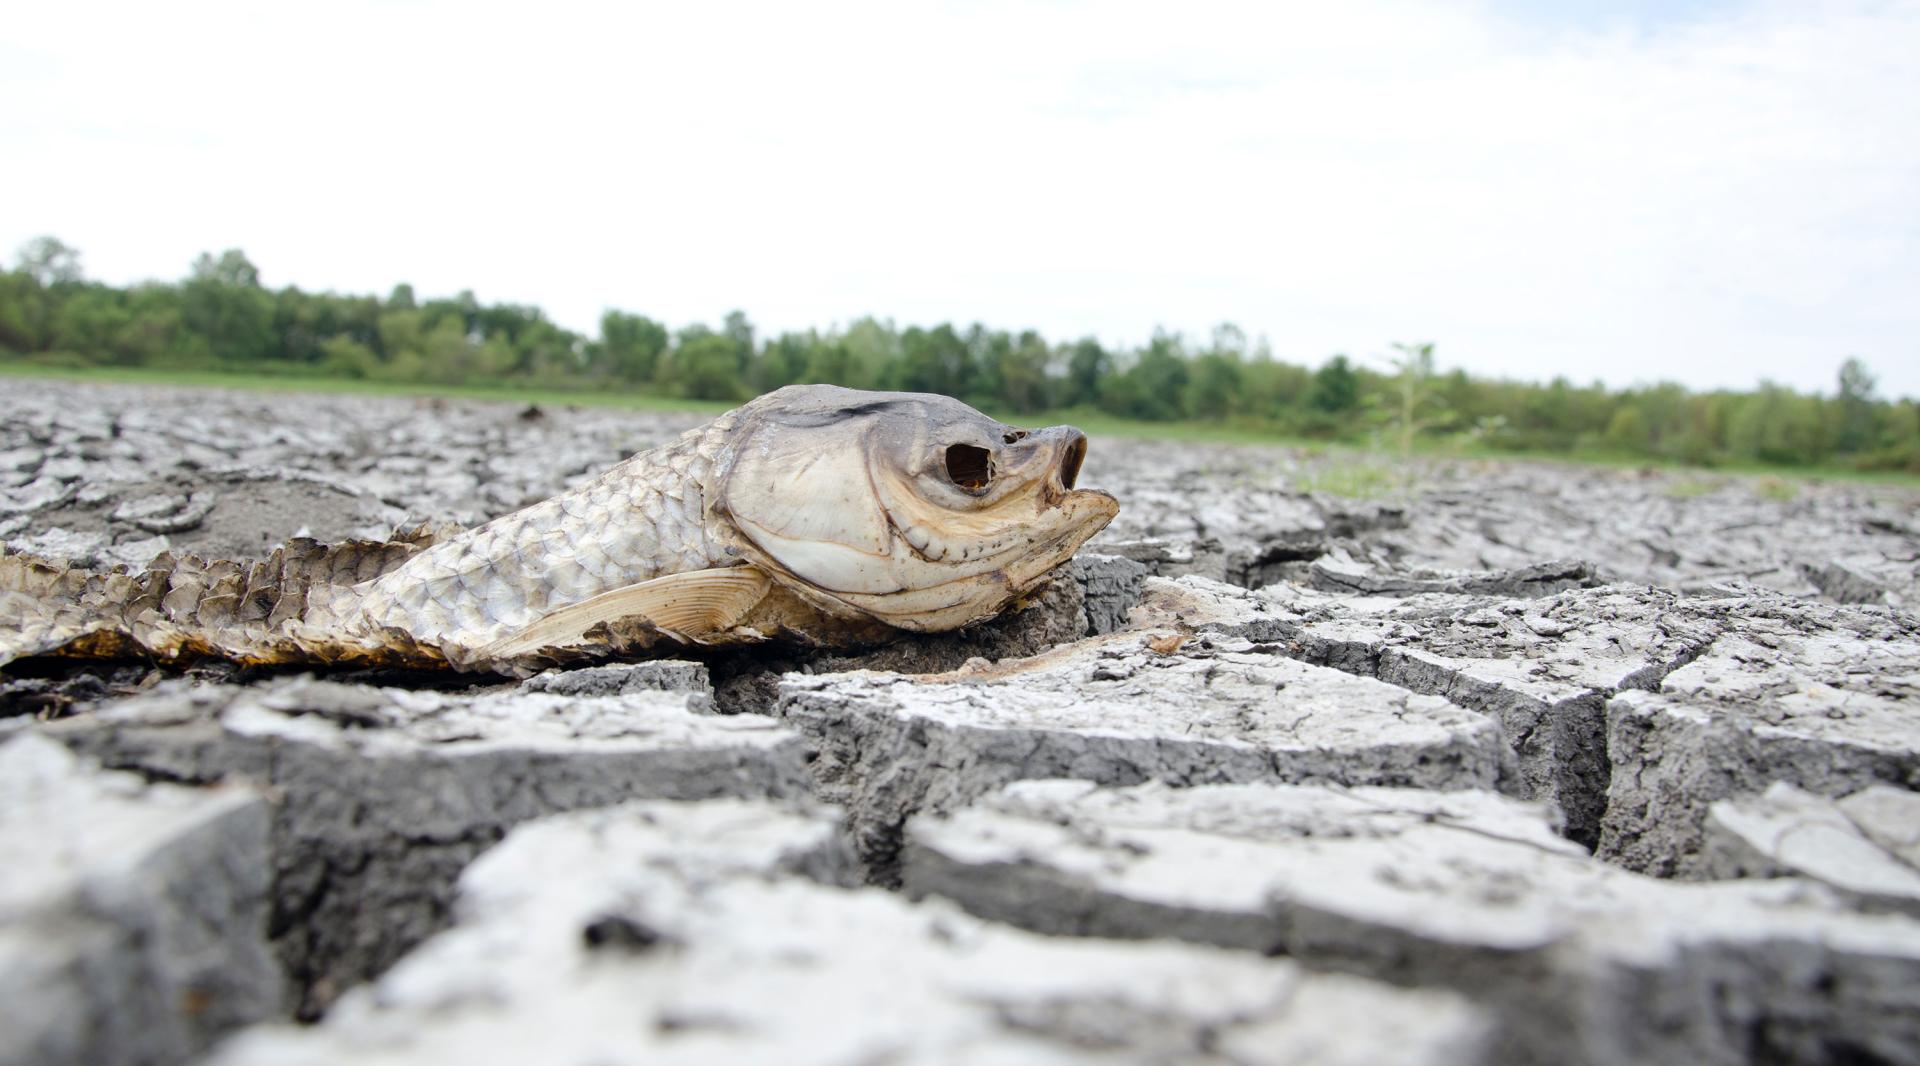 Dead fish in a dried out wetland during drought, representing the impacts of ecological drought.